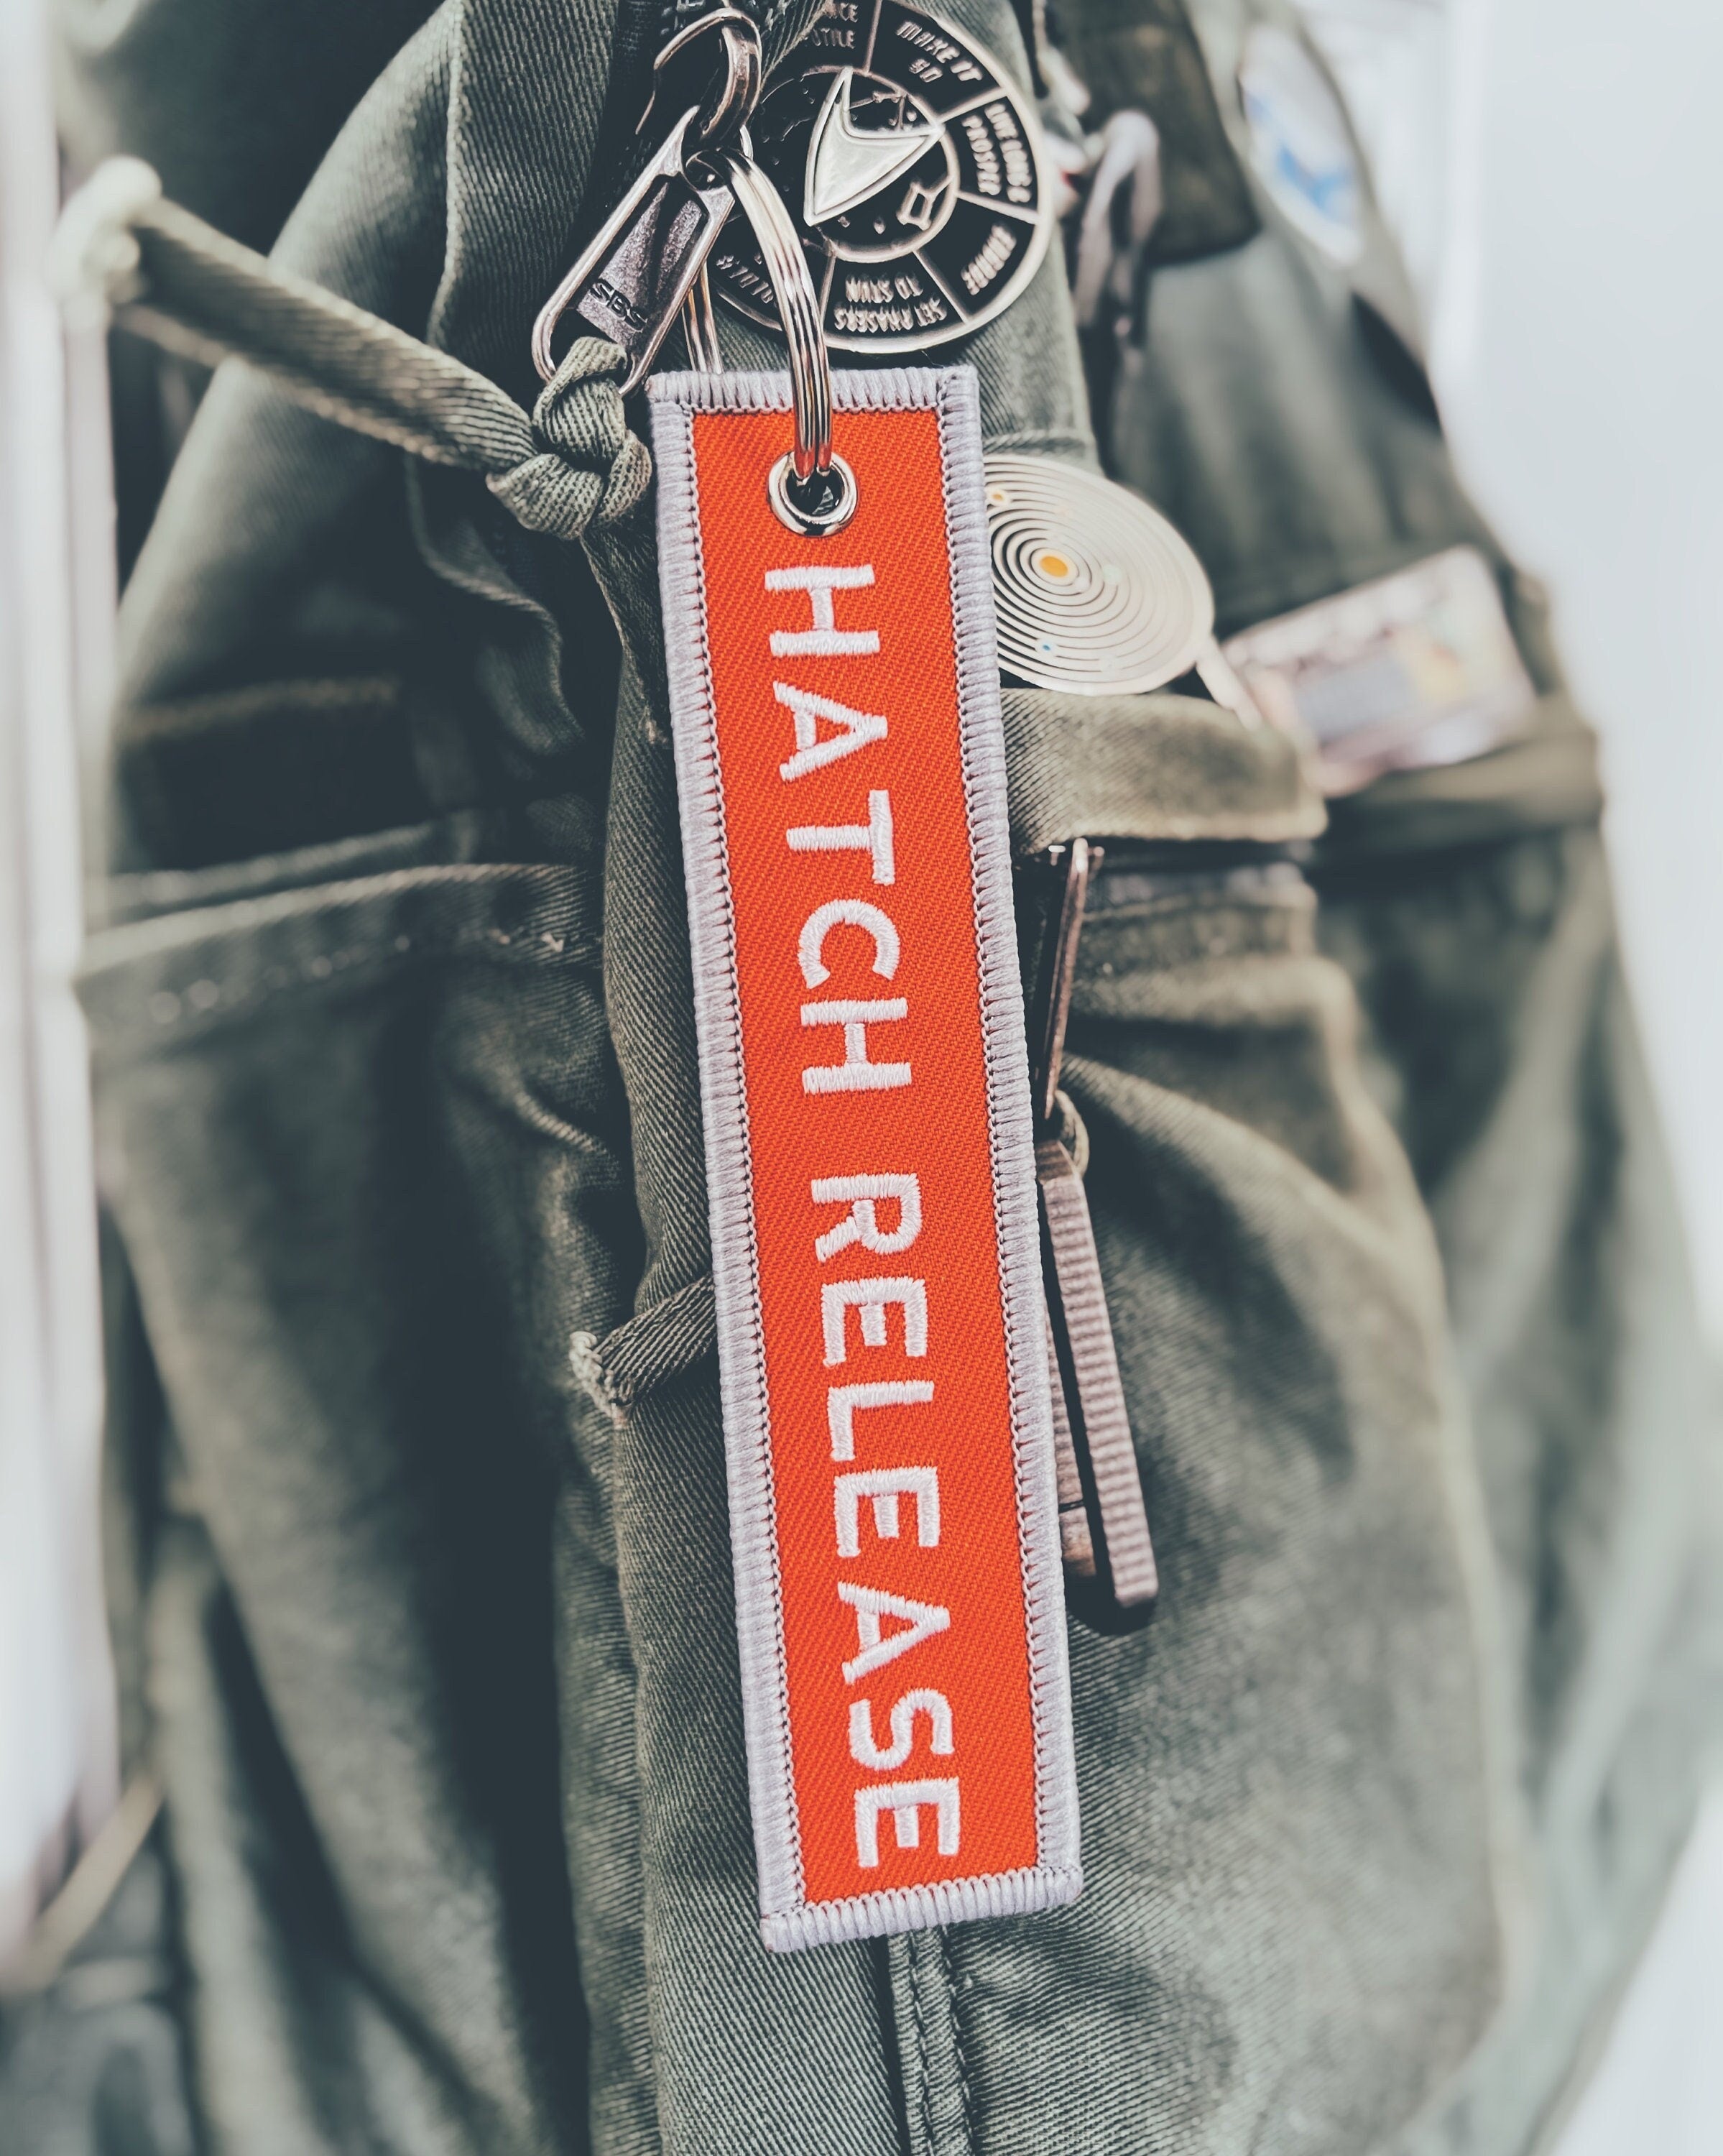 Cargo Hold "Remove Before Flight" Keychain - Dystopian EDC Keychain - Sci-Fi Cosplay Gift